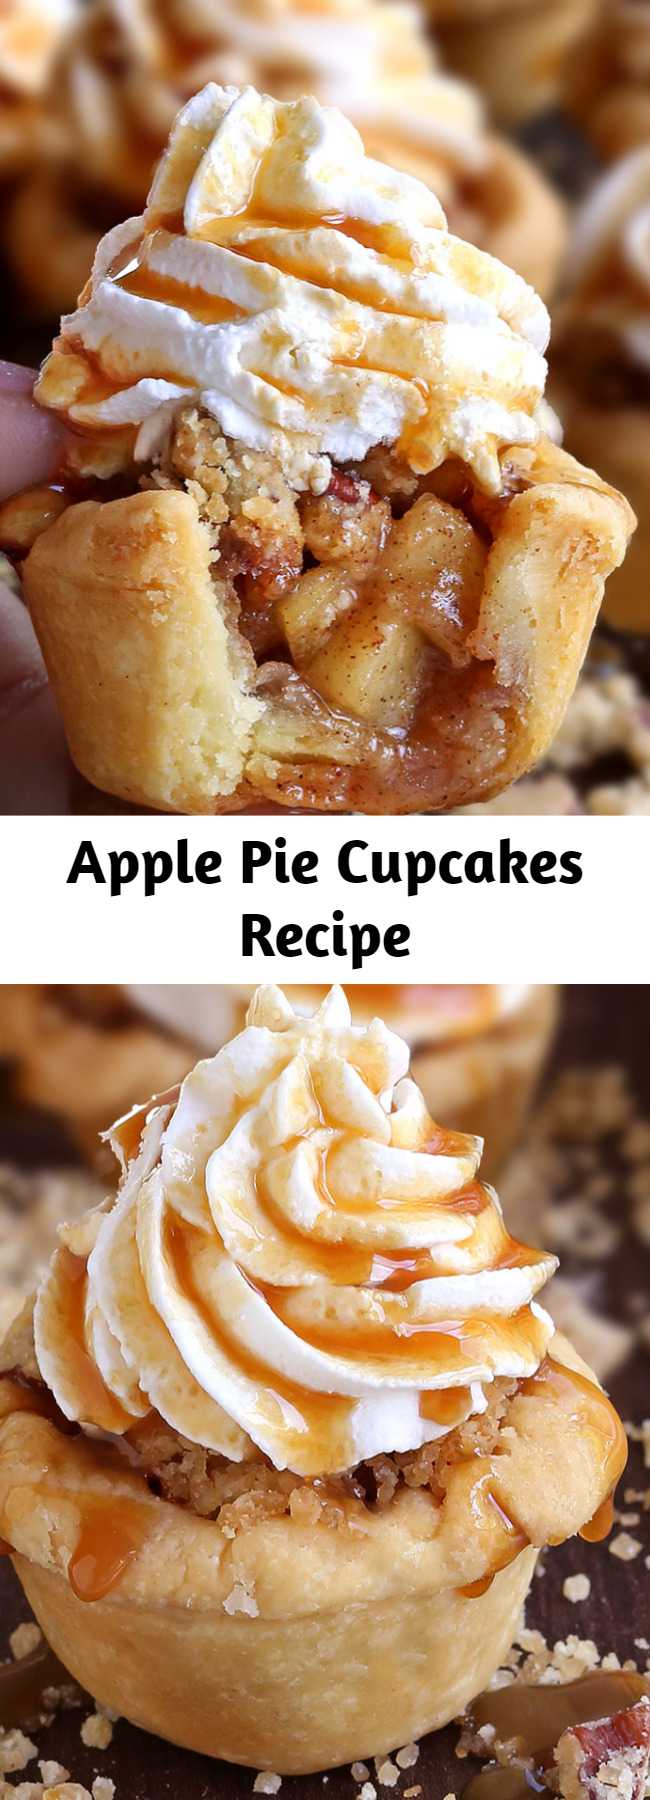 Apple Pie Cupcakes Recipe - When you don’t feel like having an apple pie then these Apple Pie Cupcakes are just the best alternative that you can get. With press-in crusts, easy apple pie filling and a simple crumb topping, these cupcake-sized desserts don’t require any special rolling, weaving, or fluting skills to create impressive little treats.